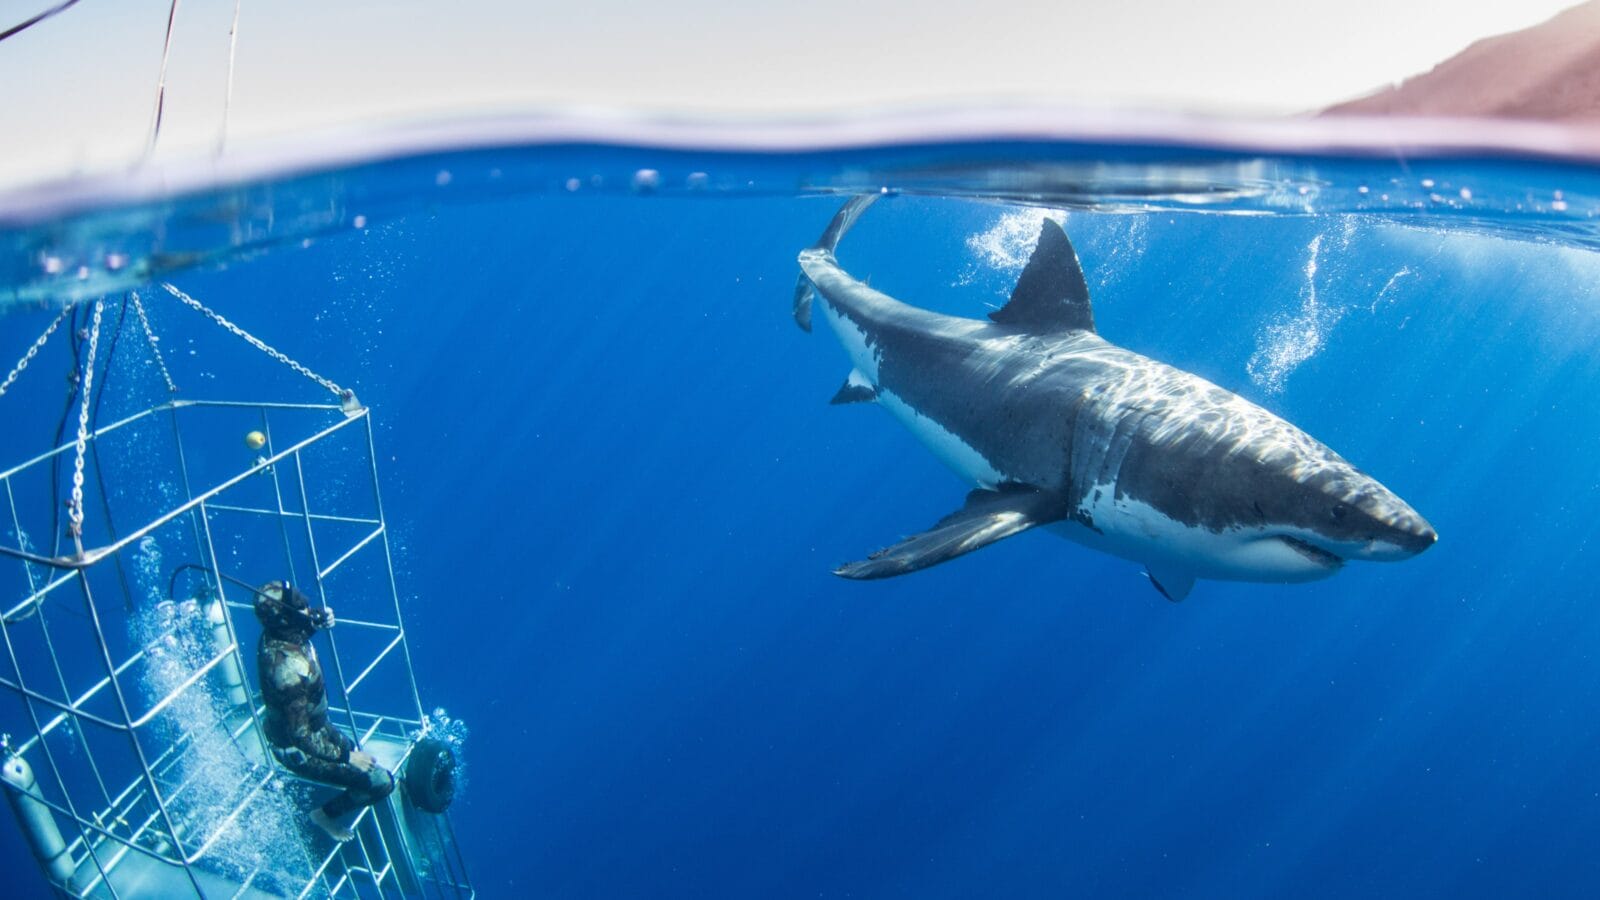 Cage diving with a great white shark.